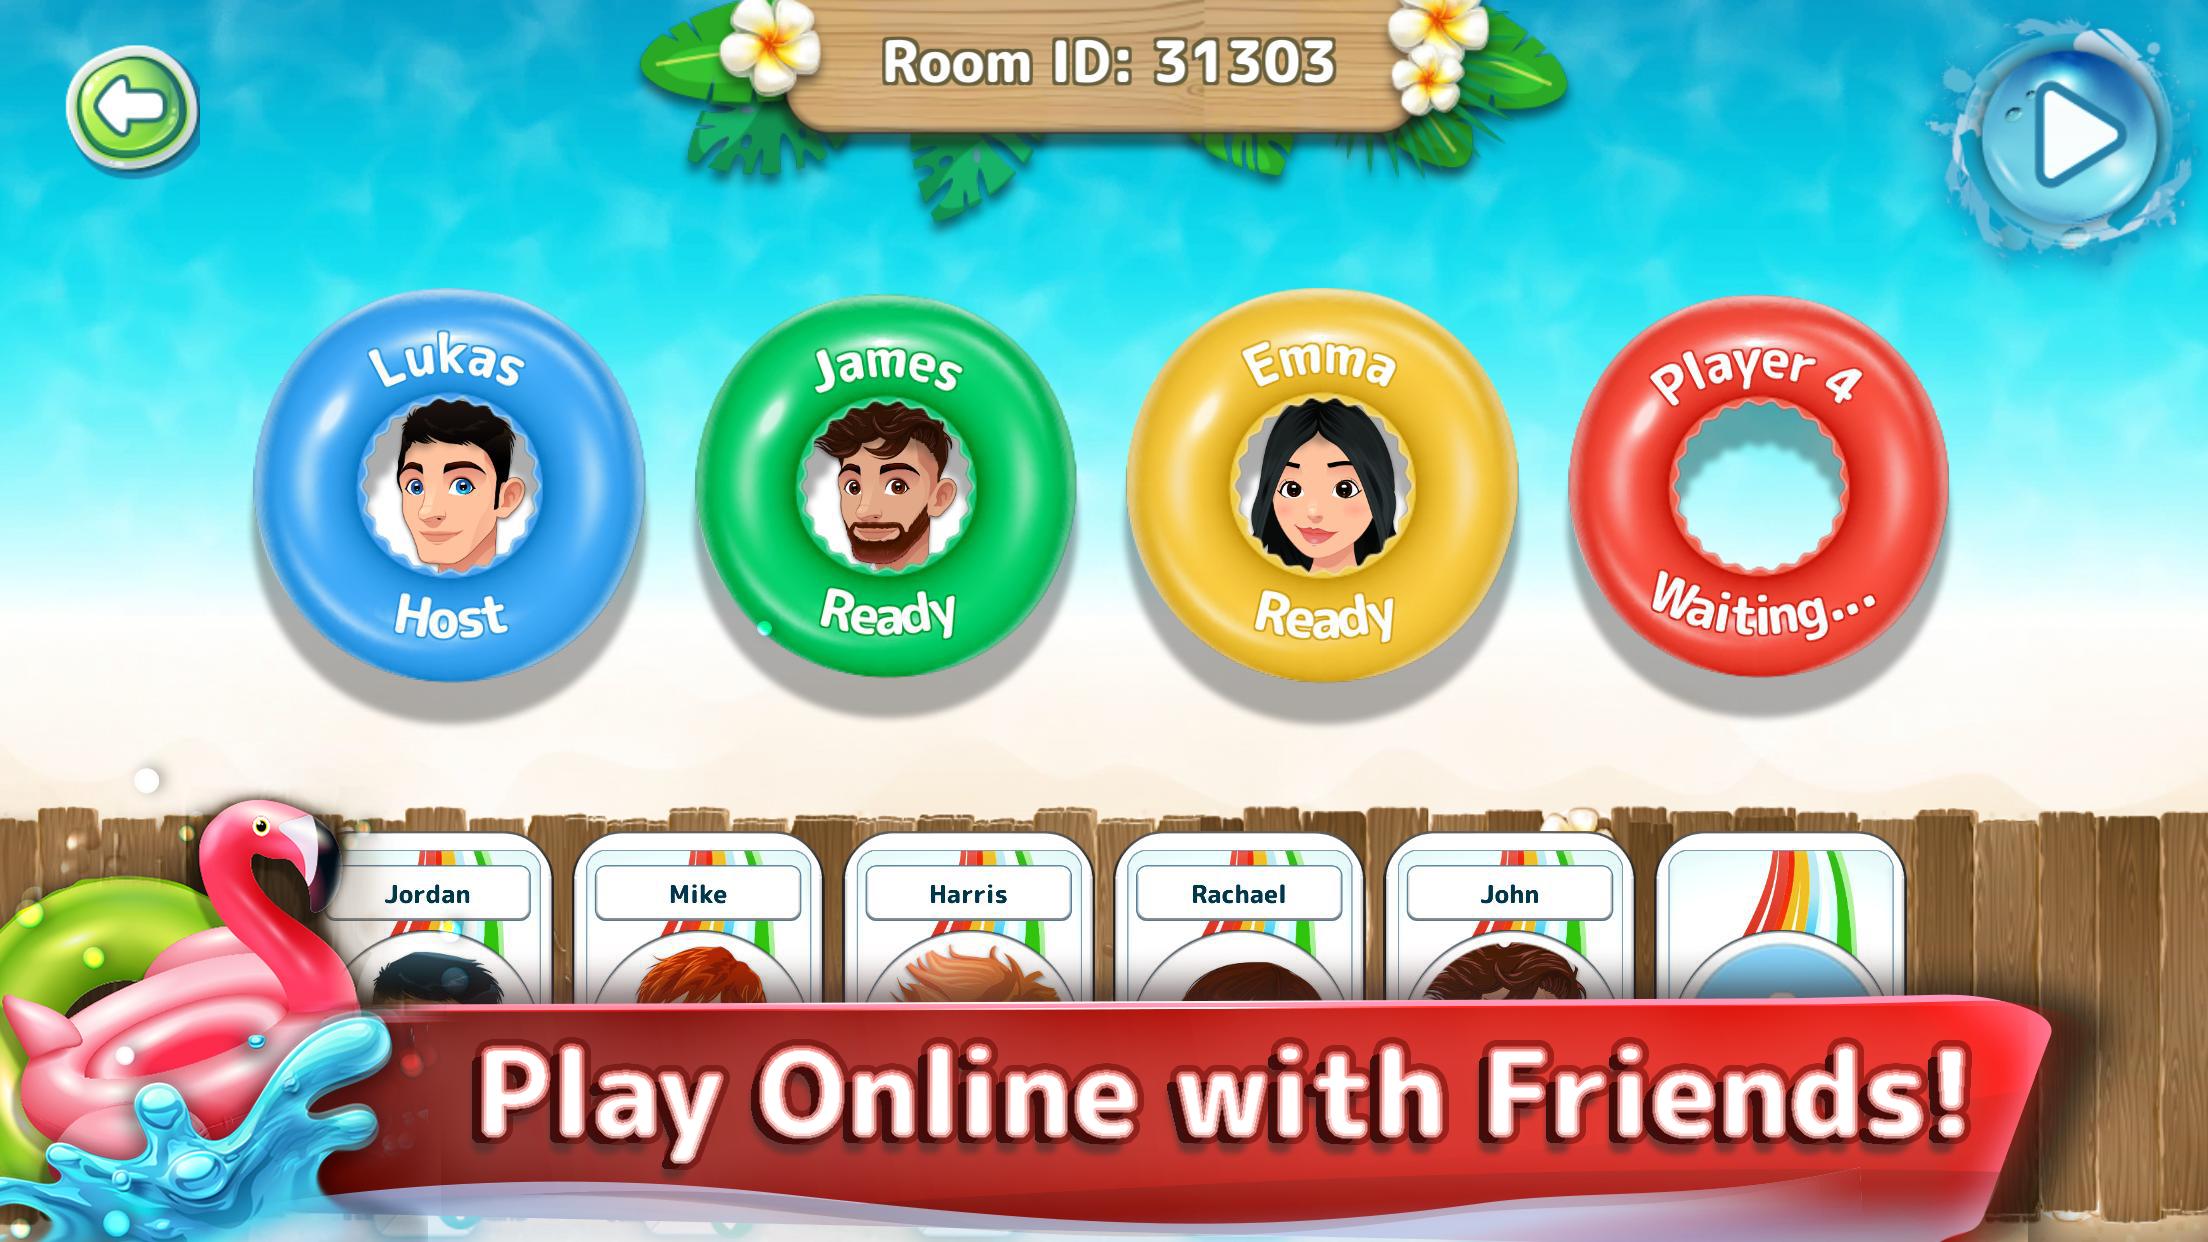 WILD CARDS Online: Multiplayer Games with Friends 3.0.22 Screenshot 4